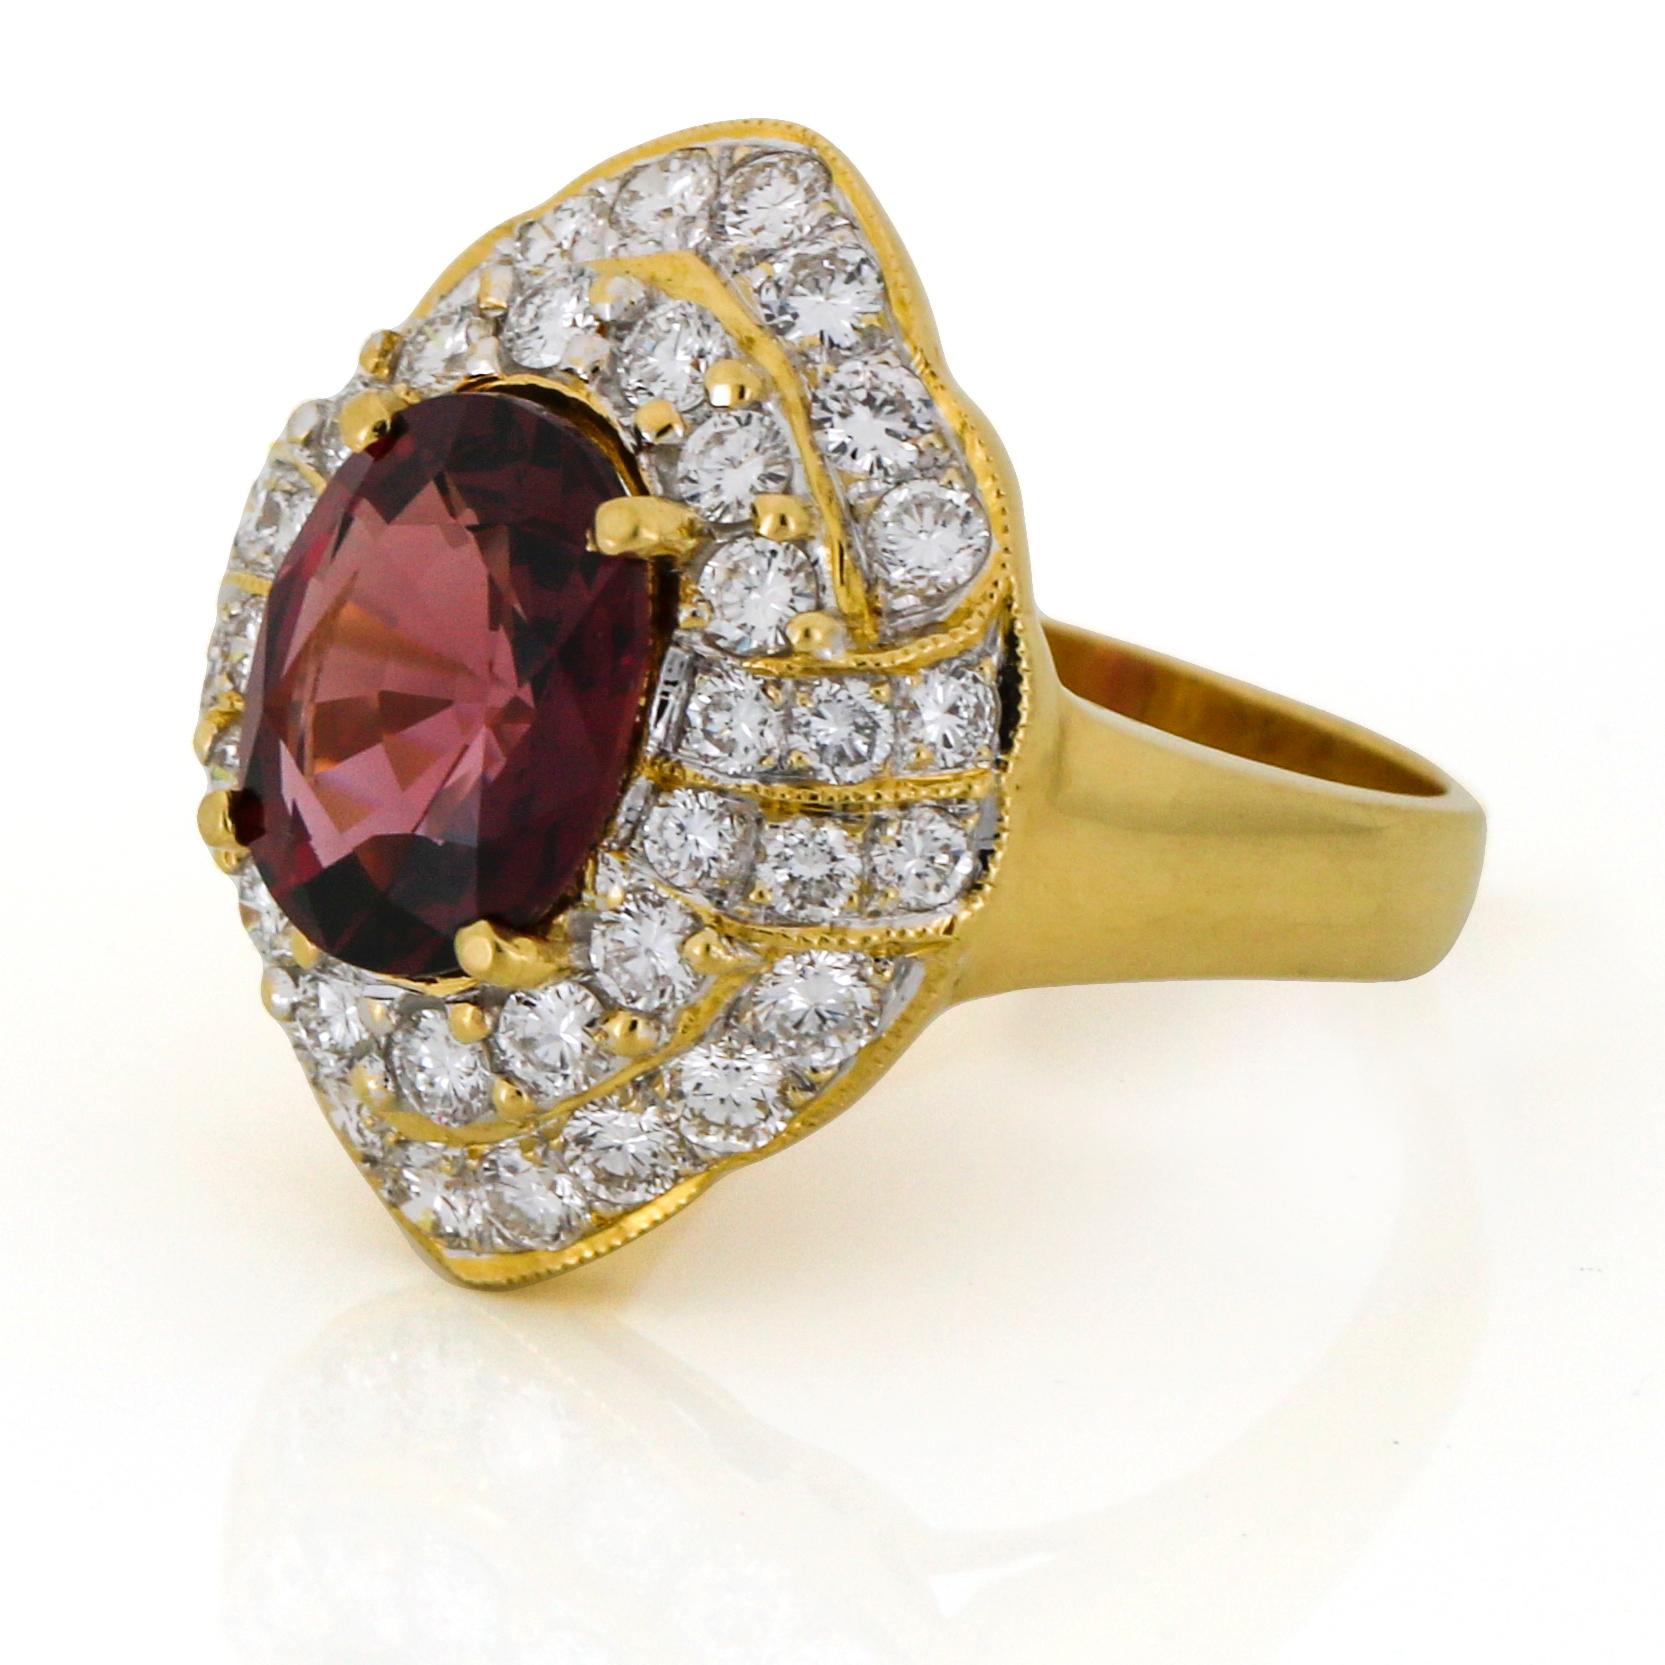 GIA 3.25 Carat Red Spinel Diamond Cocktail Ring in 18 Karat Yellow Gold For Sale 3